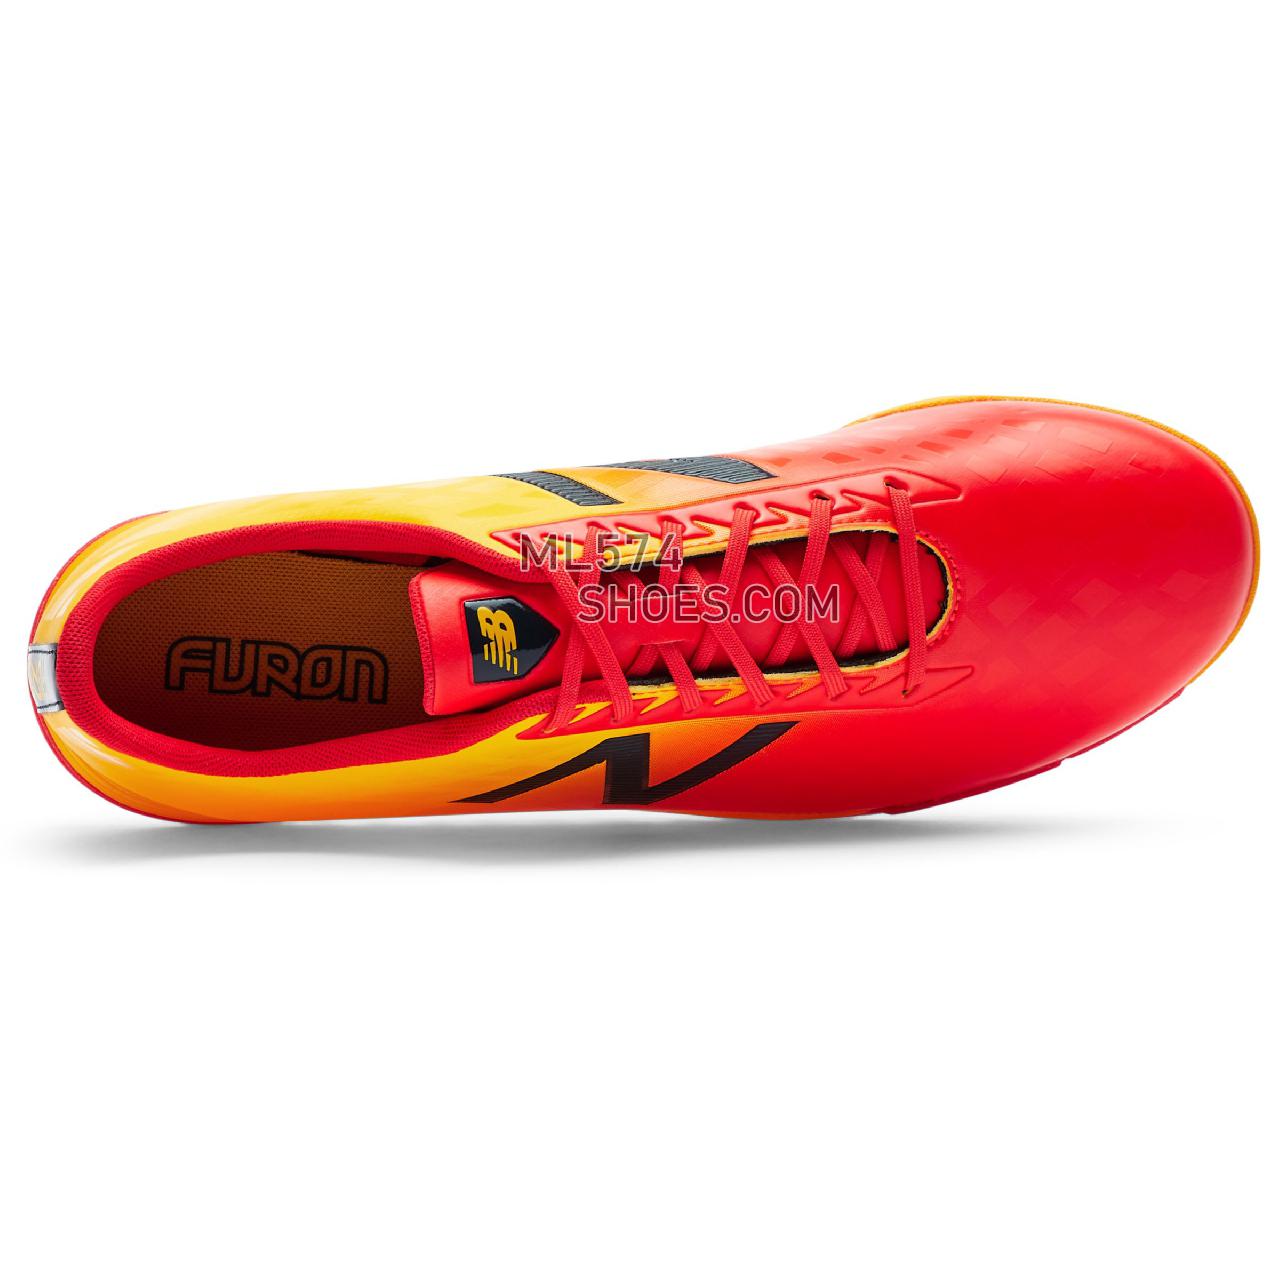 New Balance Furon v4 Dispatch TF - Men's 4 - Soccer Flame with Aztec Gold - MSFDTFA4